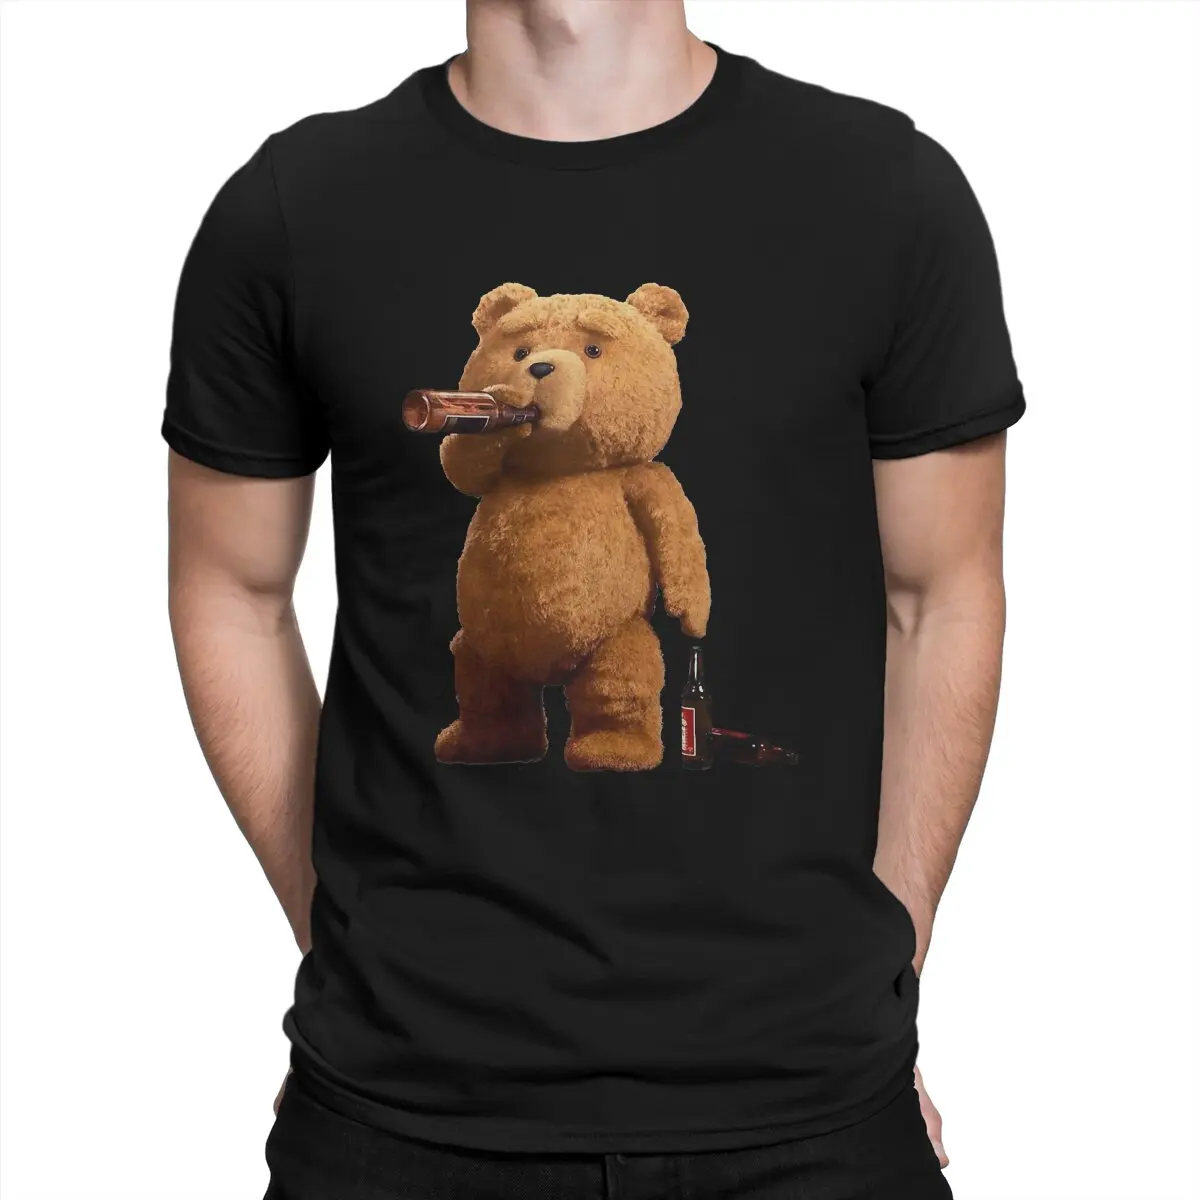 

Ted Drink Beer Men T Shirts Teddy Bear Fashion Tees Short Sleeve O Neck T-Shirt 100% Cotton Gift Clothes